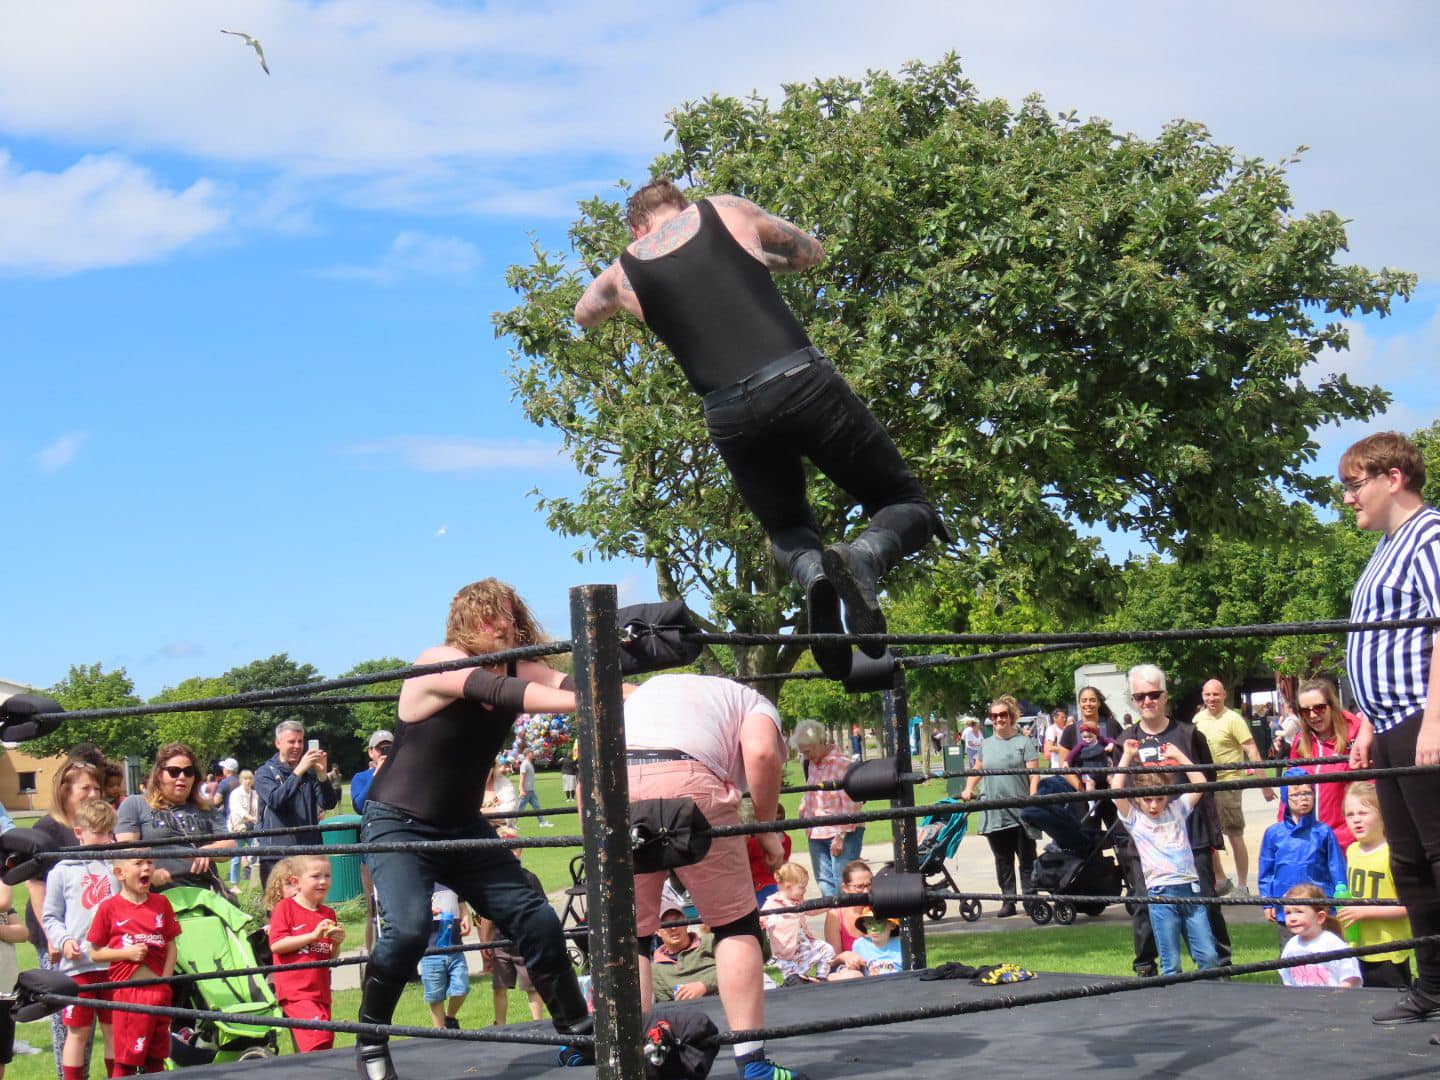 Wrestling at The Far Away Land Festival at Victoria Park in Southport. Photo by Andrew Brown Media